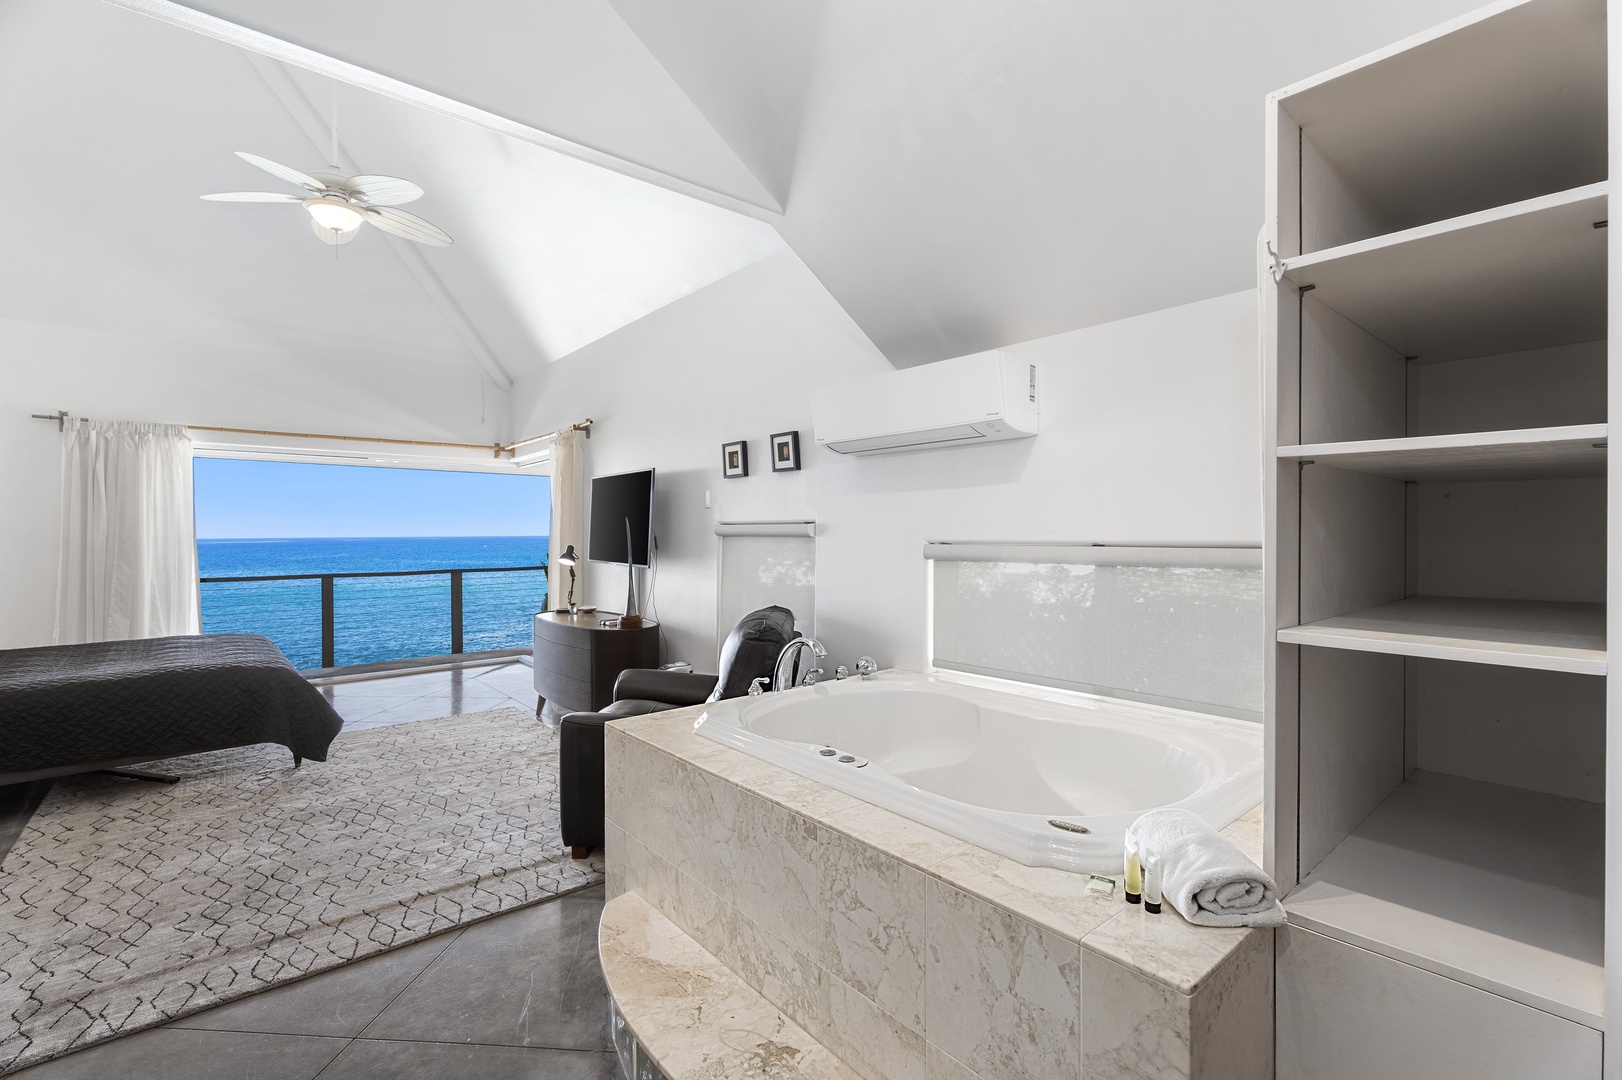 Kailua-Kona Vacation Rentals, Hale Kope Kai - Soaking tub in the Primary bedroom to take in the view